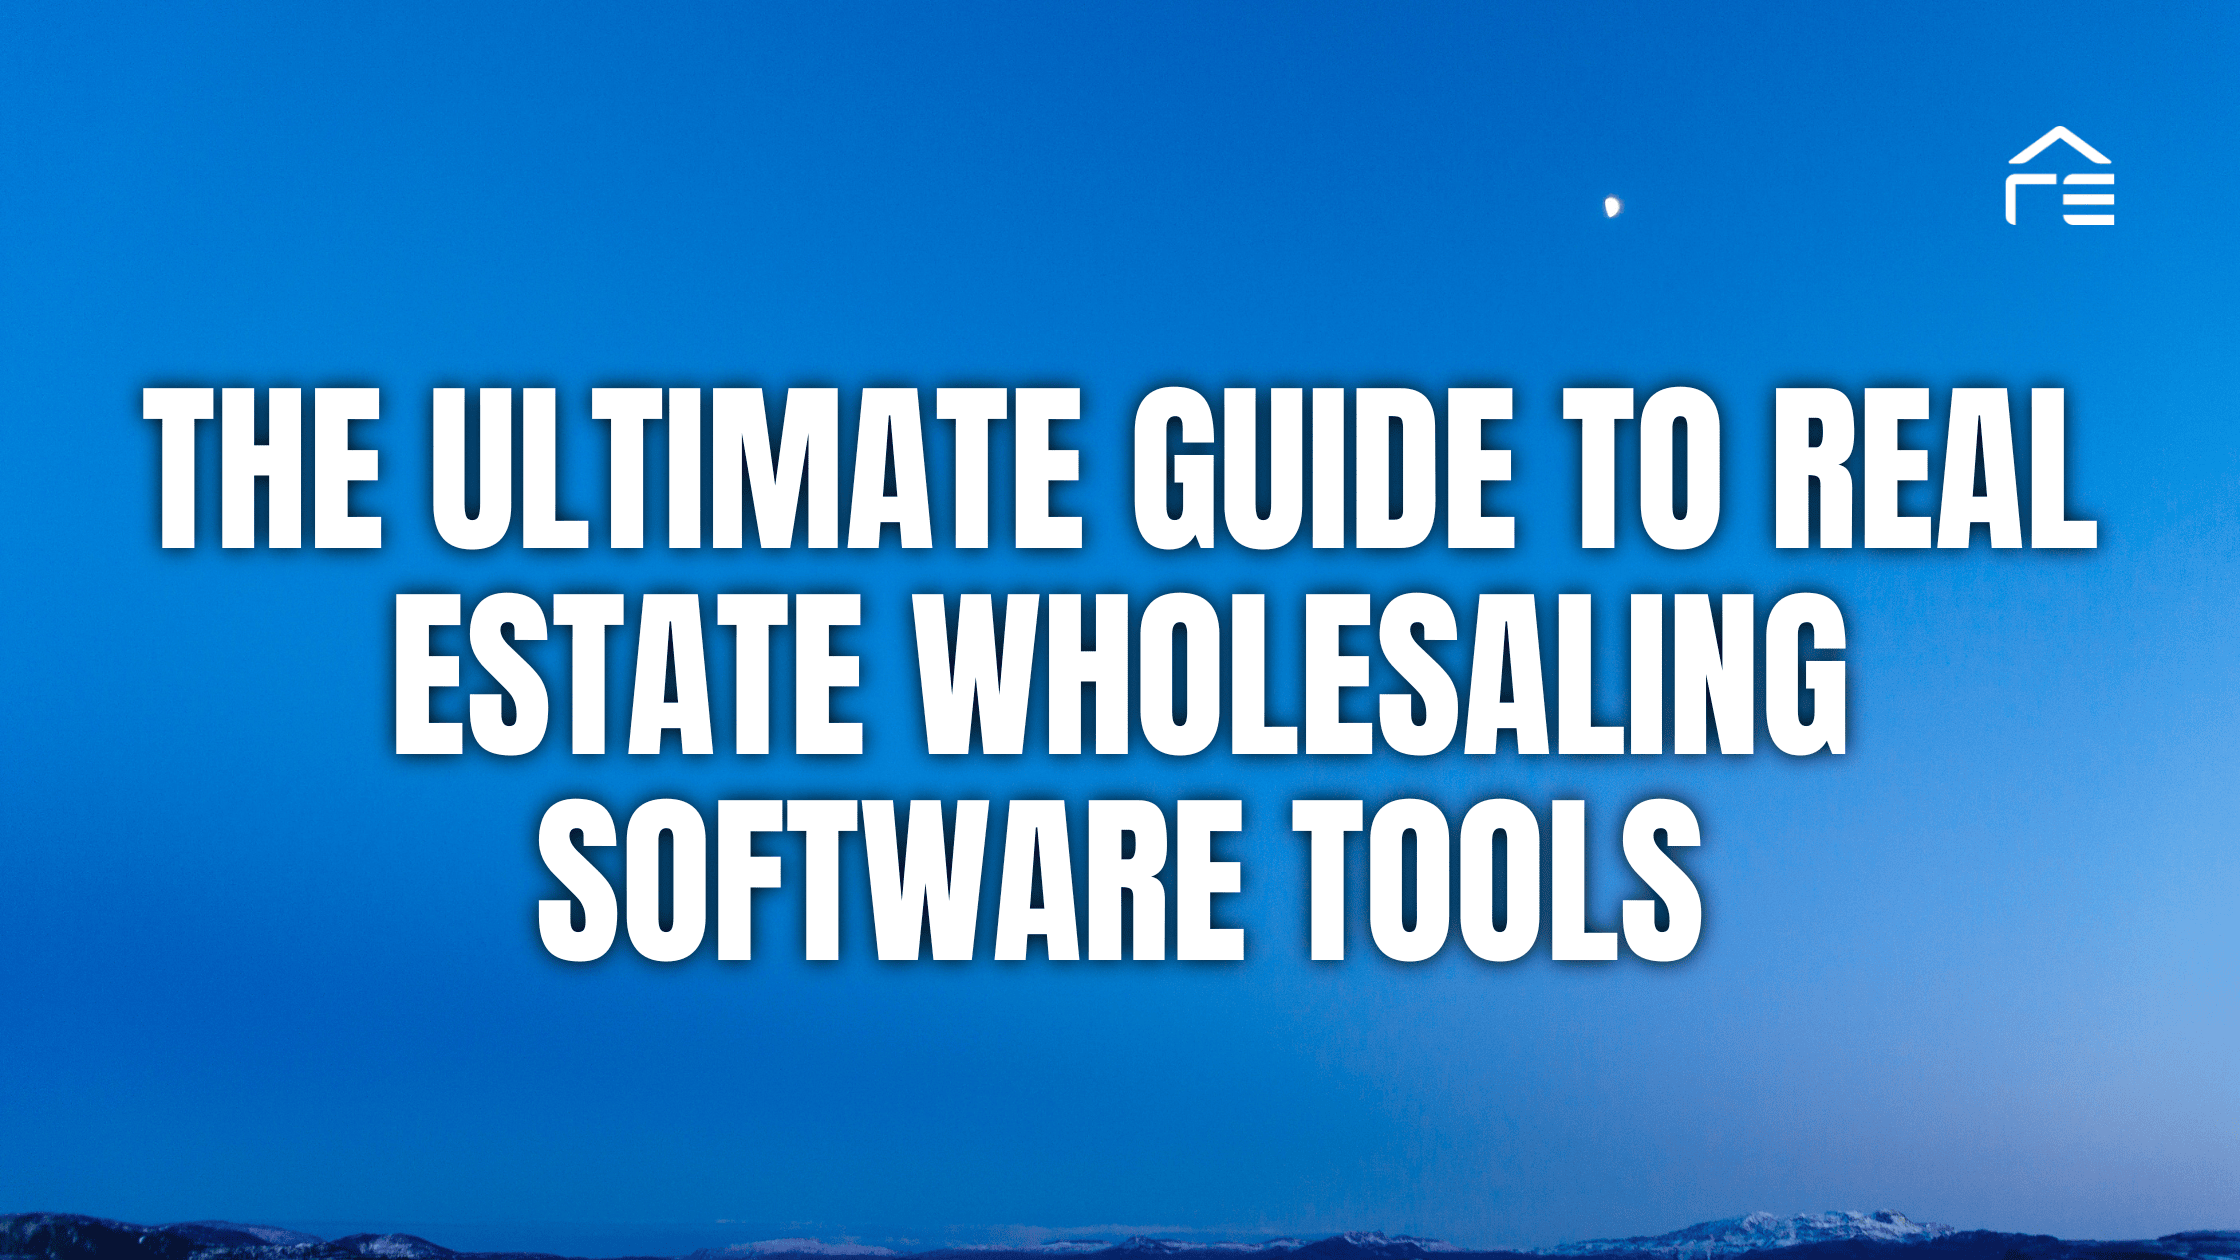 The Ultimate Guide to Real Estate Wholesaling Software Tools